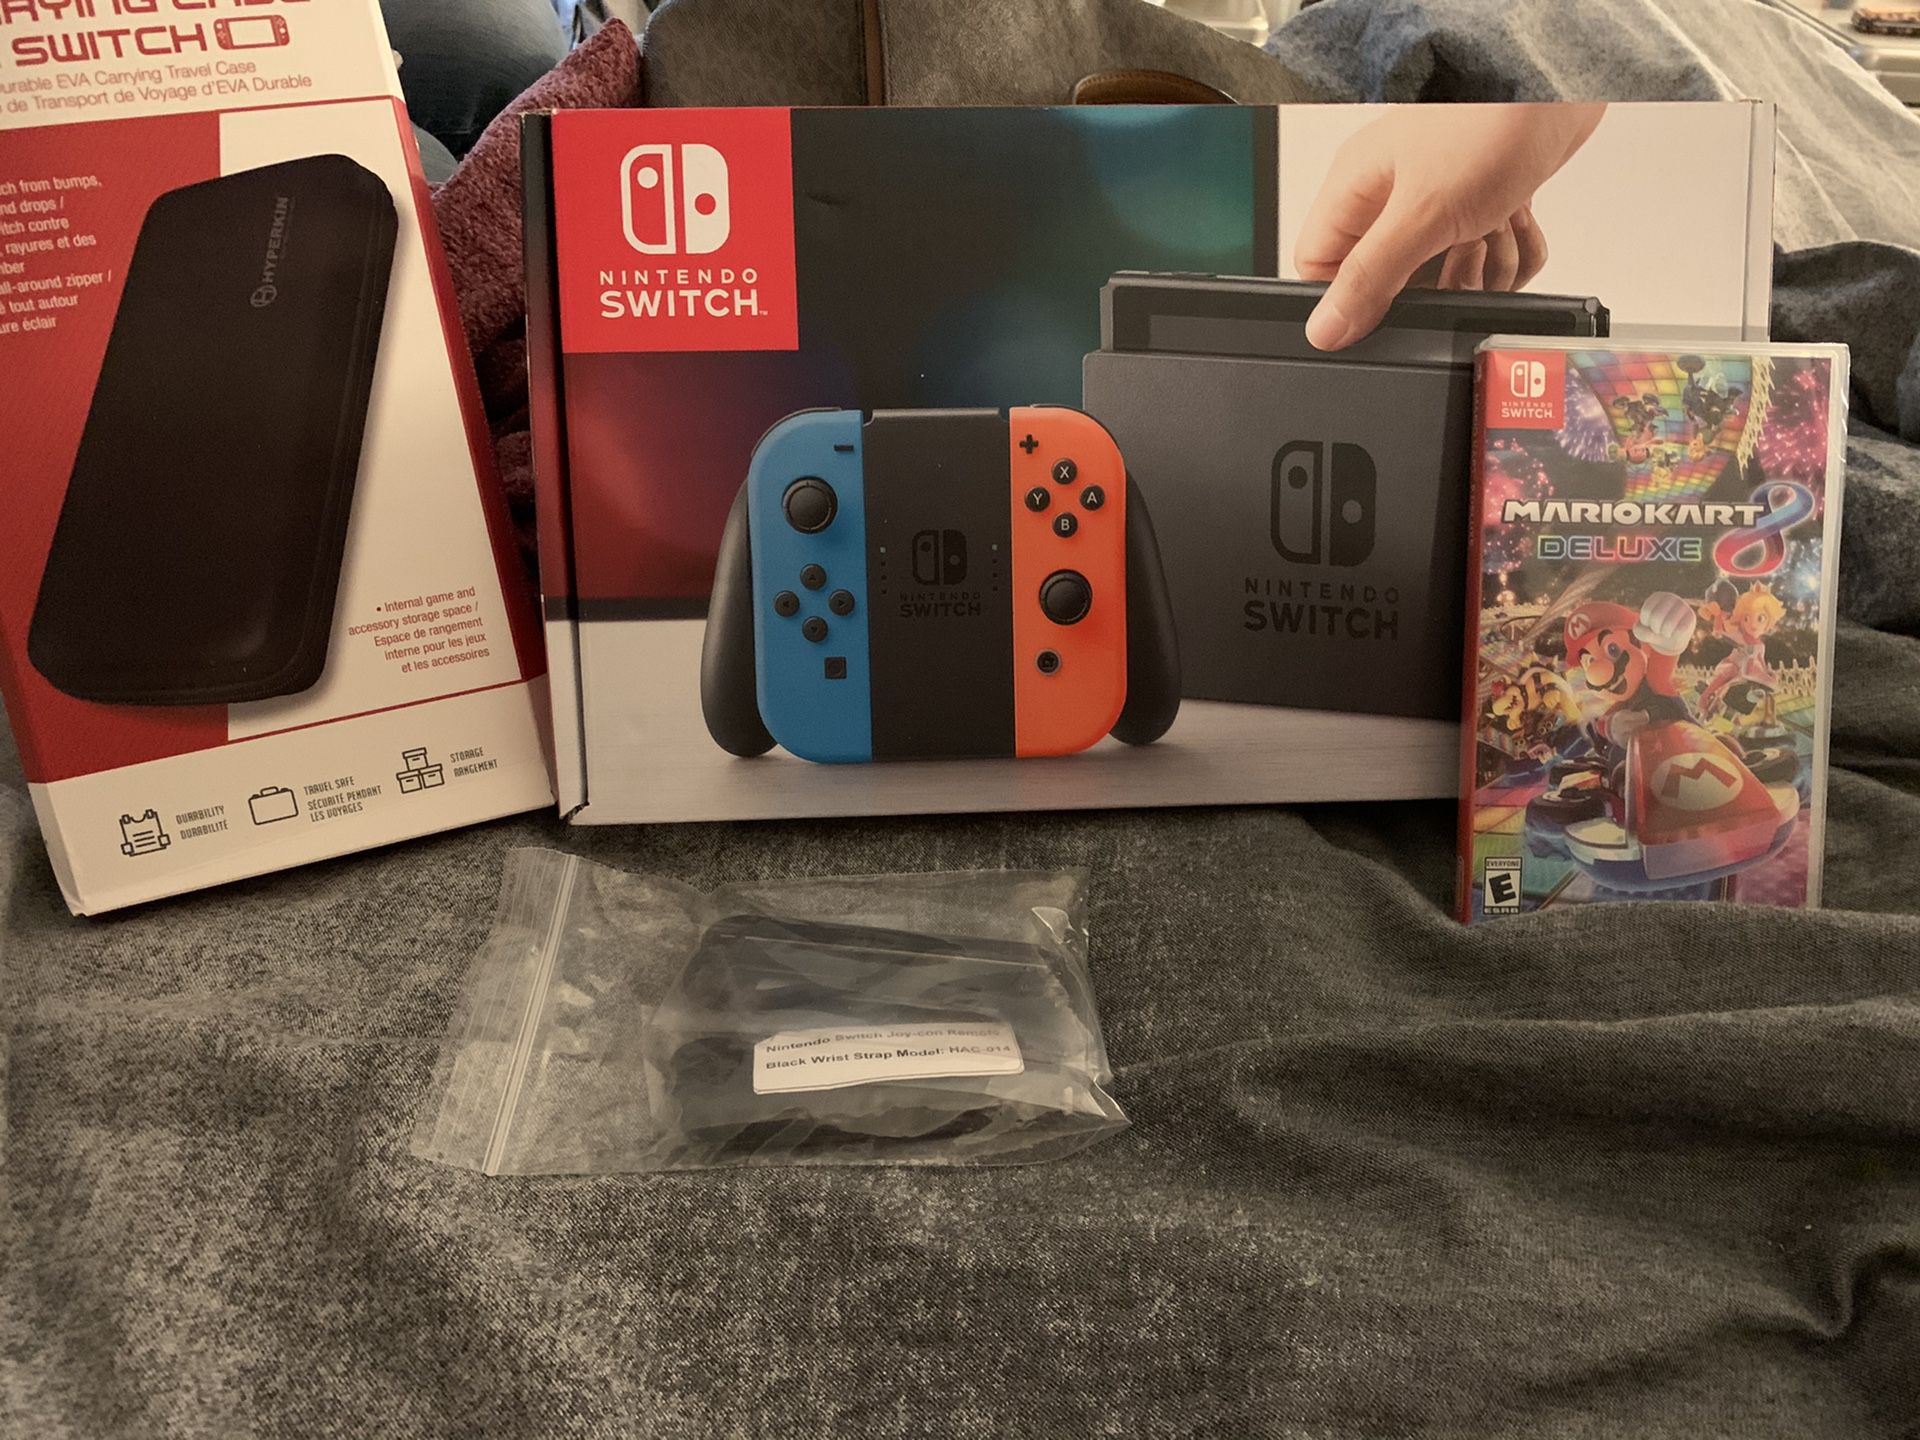 Nintendo Switch “Bundle New in Box” with Mario Kart 8 & Hard Shell Case